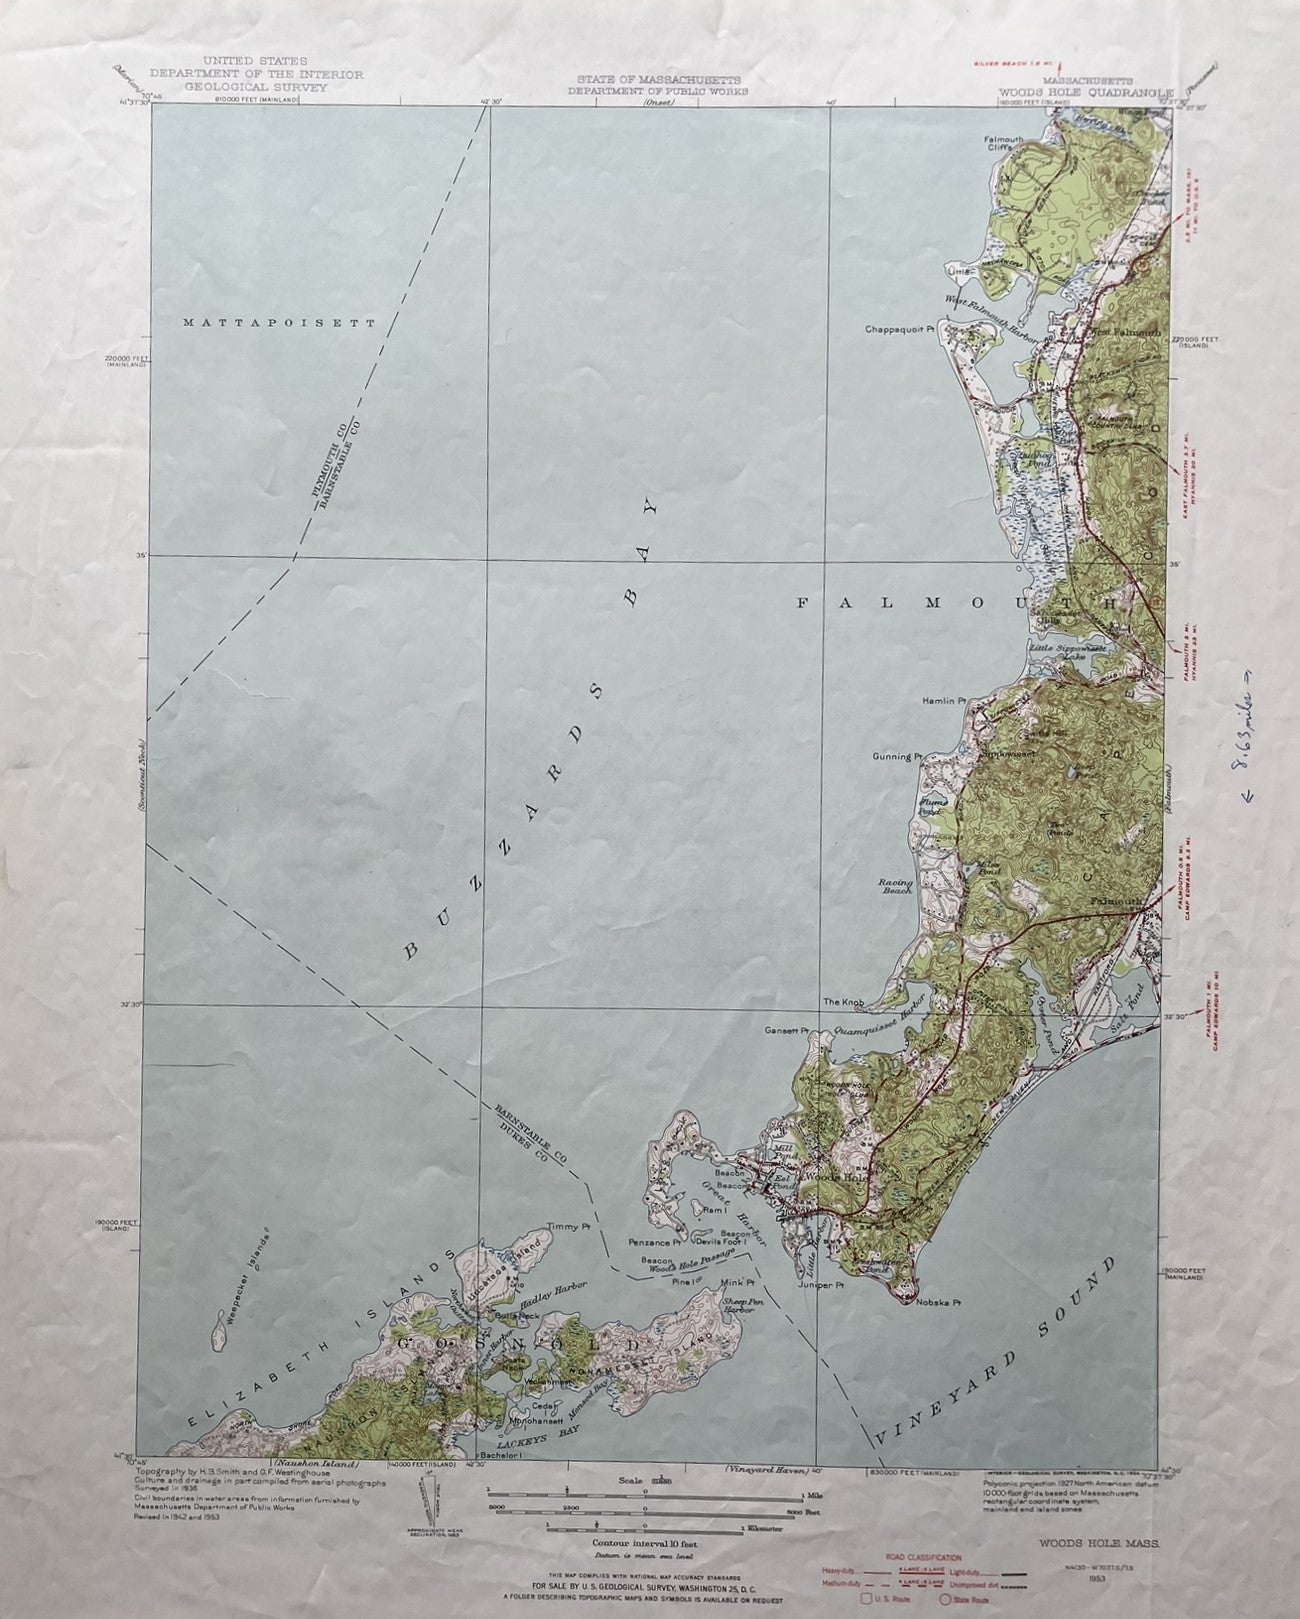 Genuine-Vintage-Map-Woods-Hole-Mass-Cape-Cod-Antique-Topographic-Map-1953-USGS-U-S-Geological-Survey-Maps-Of-Antiquity